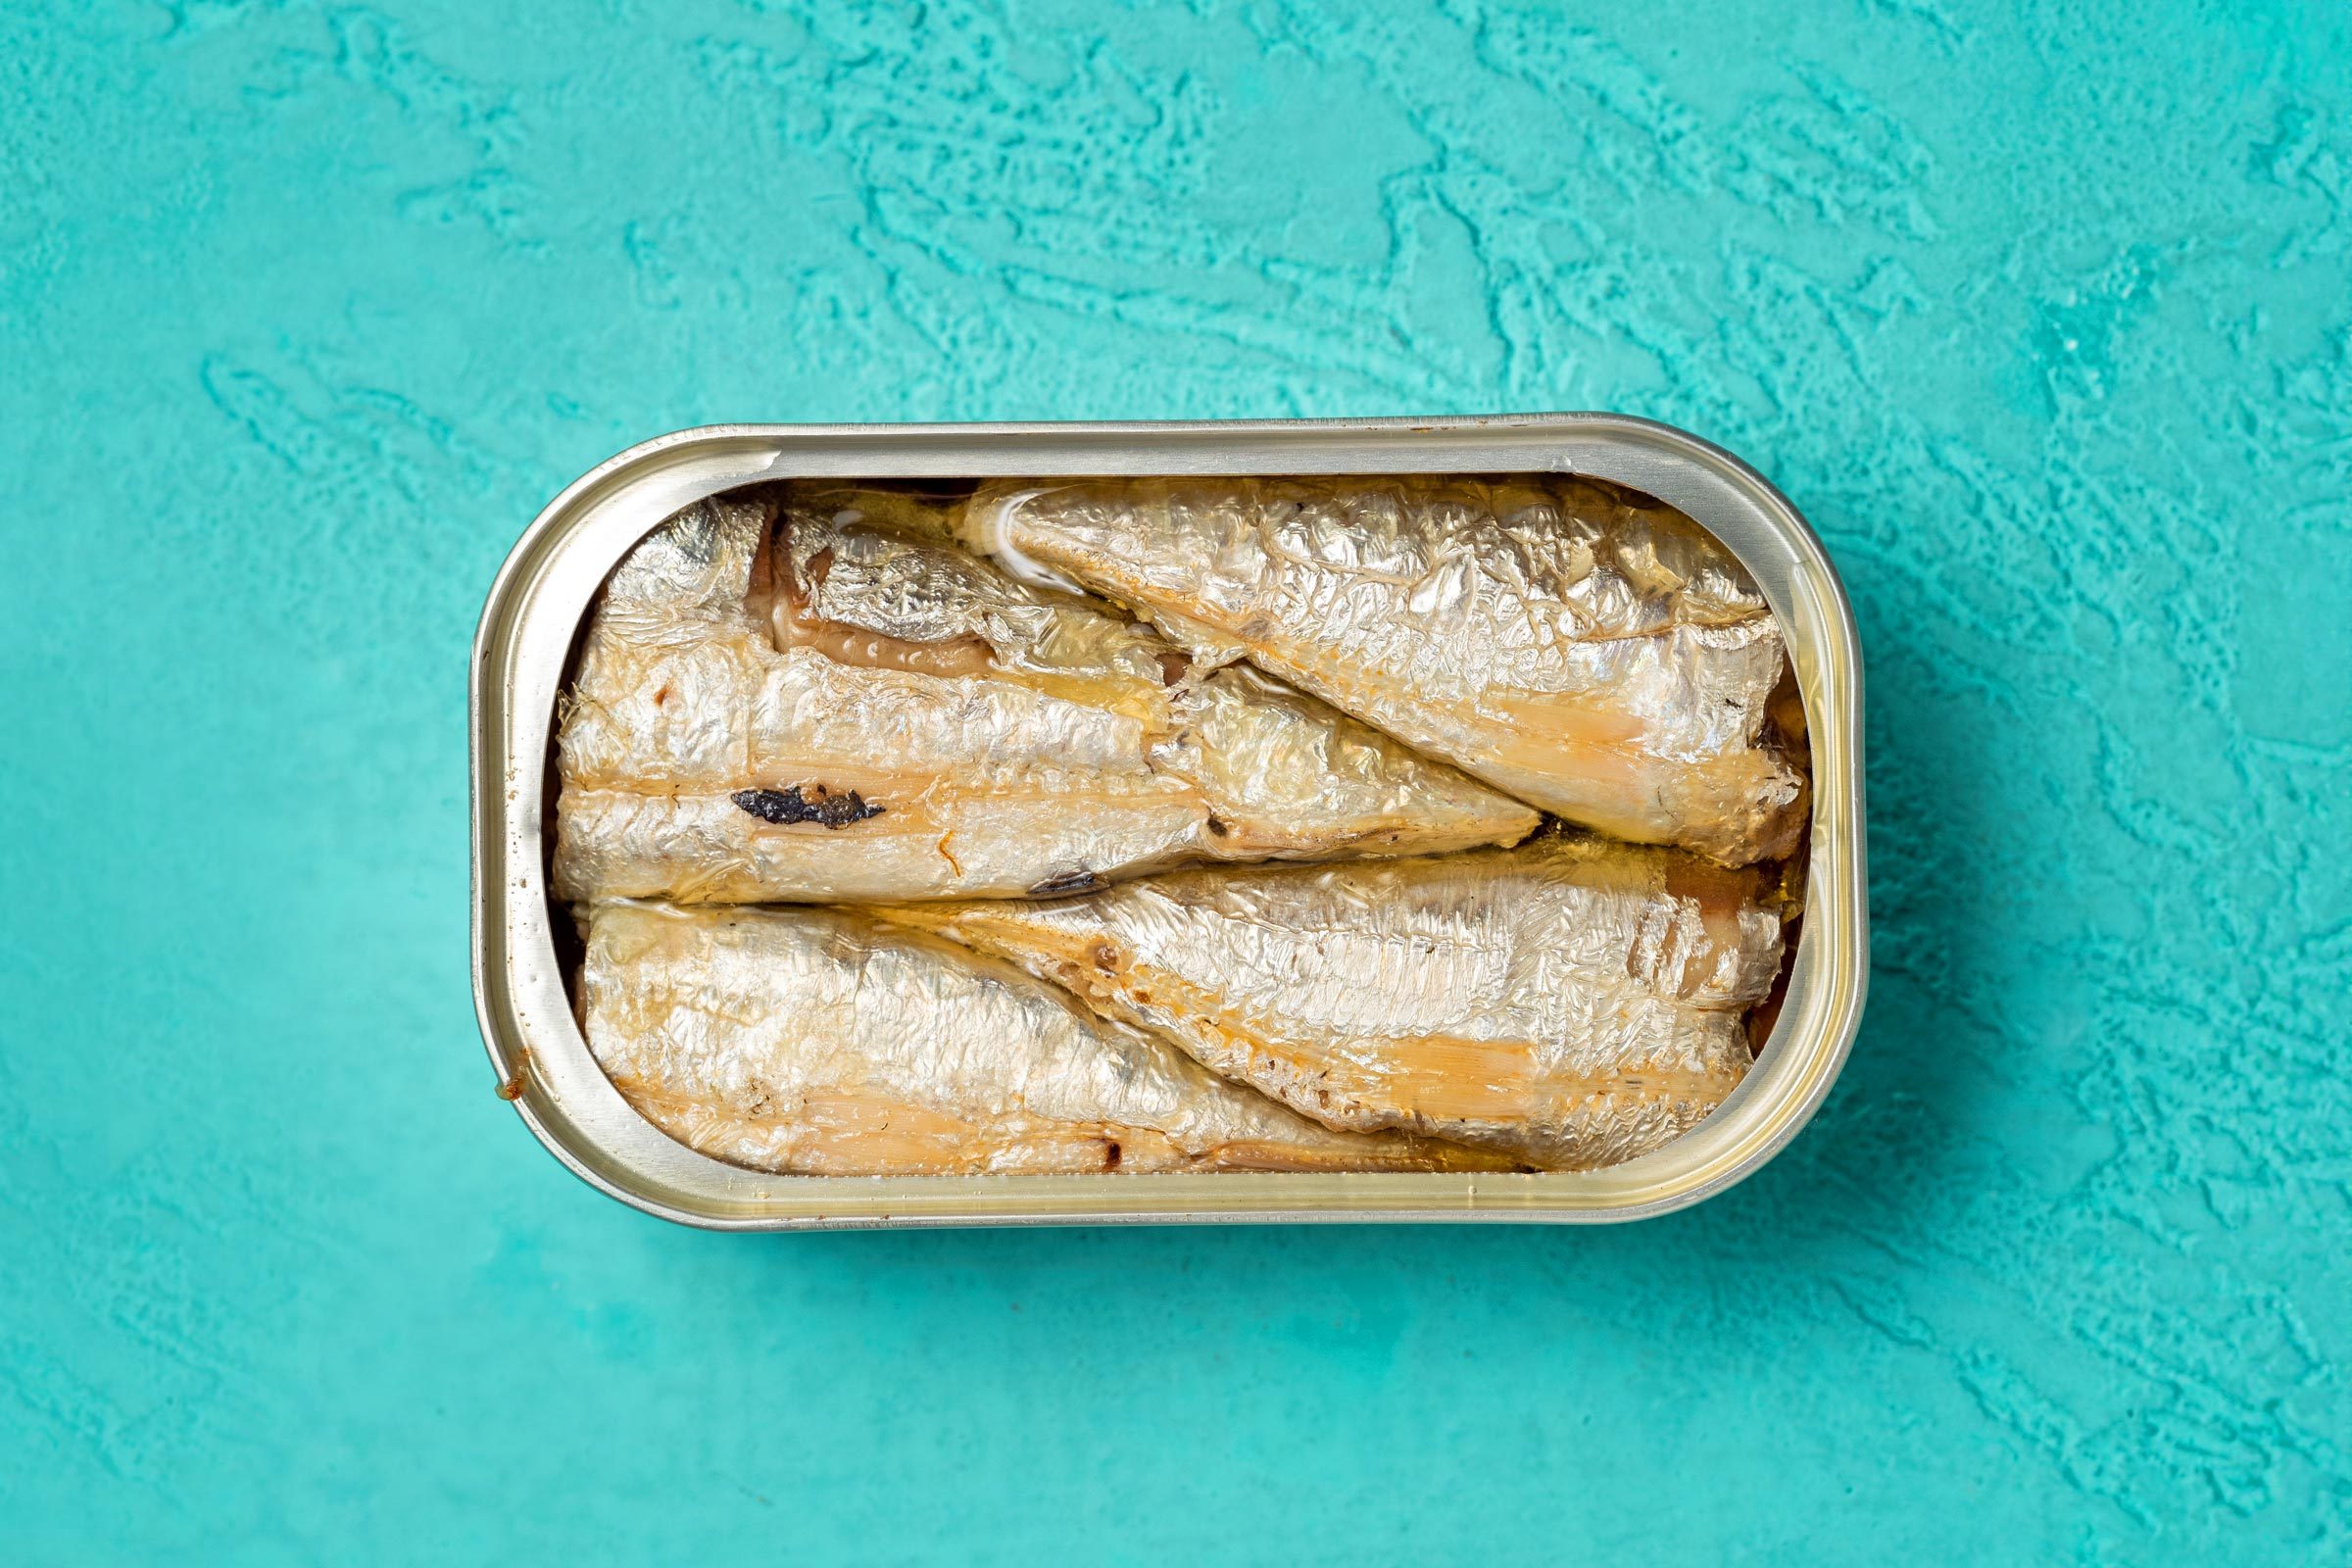 I Ate Sardines Every Day for a Week—Here's What Happened